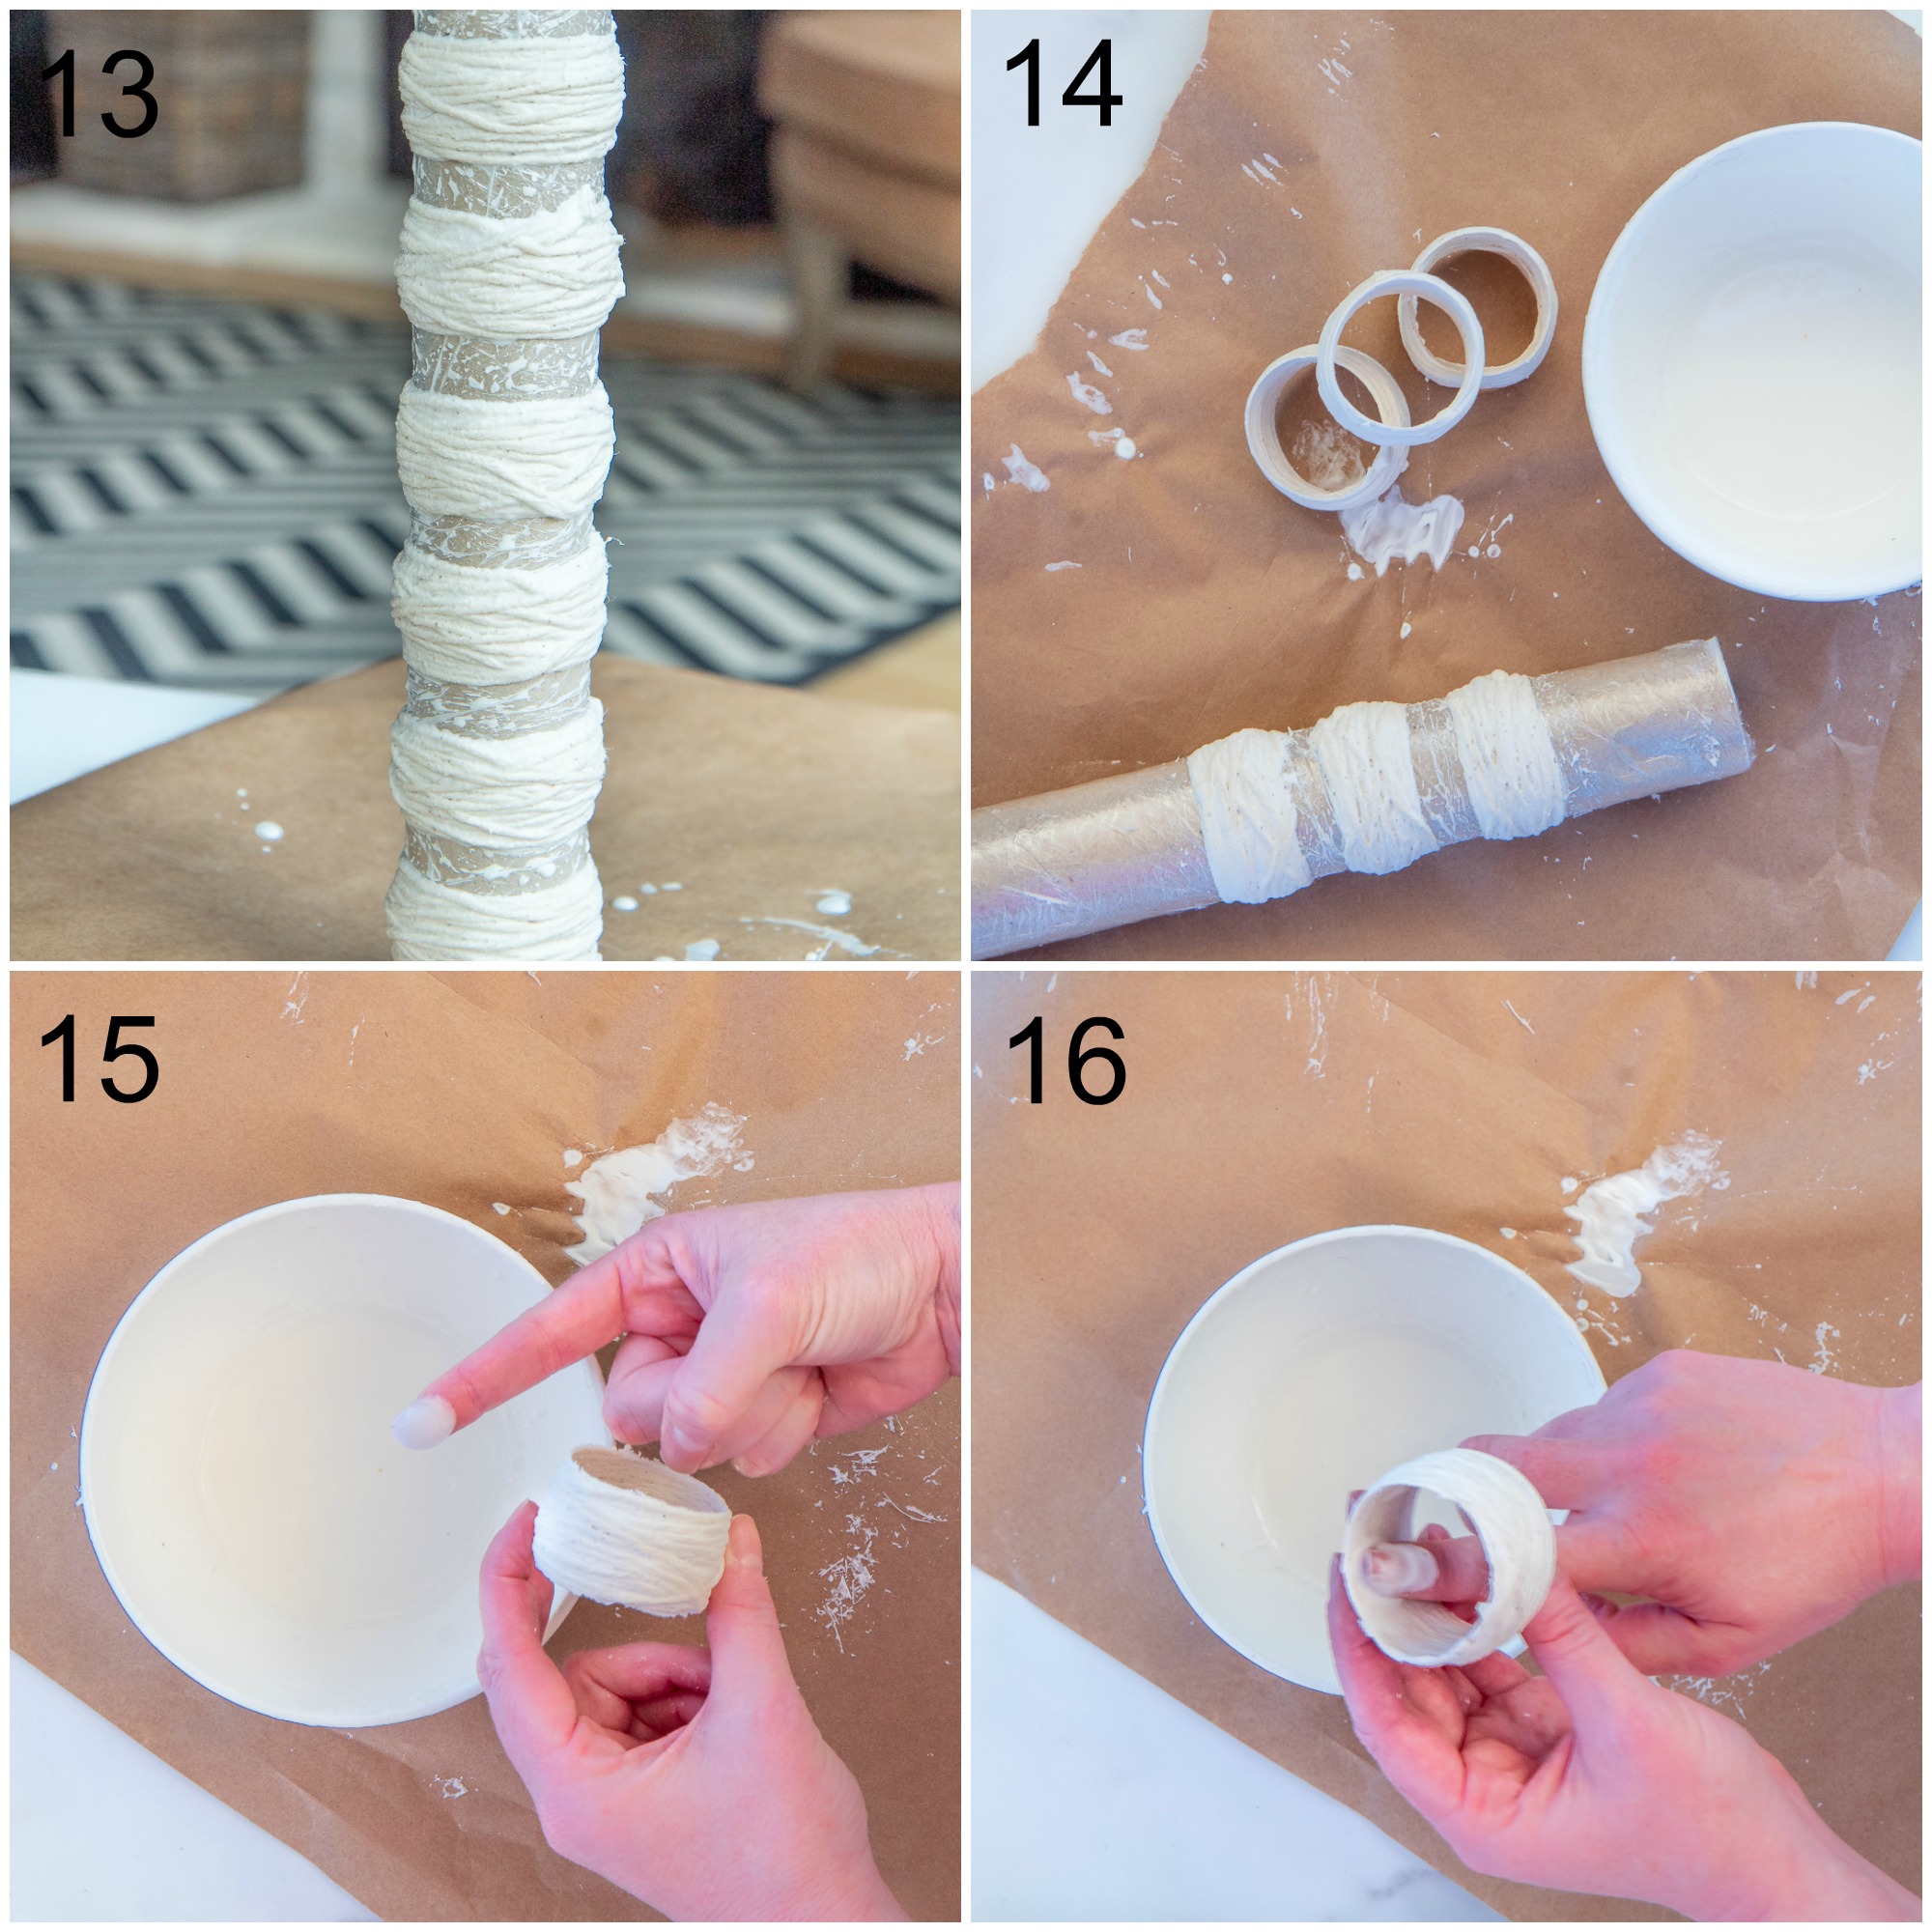 How to make napkin rings out of paper towel rolls, twine & glue